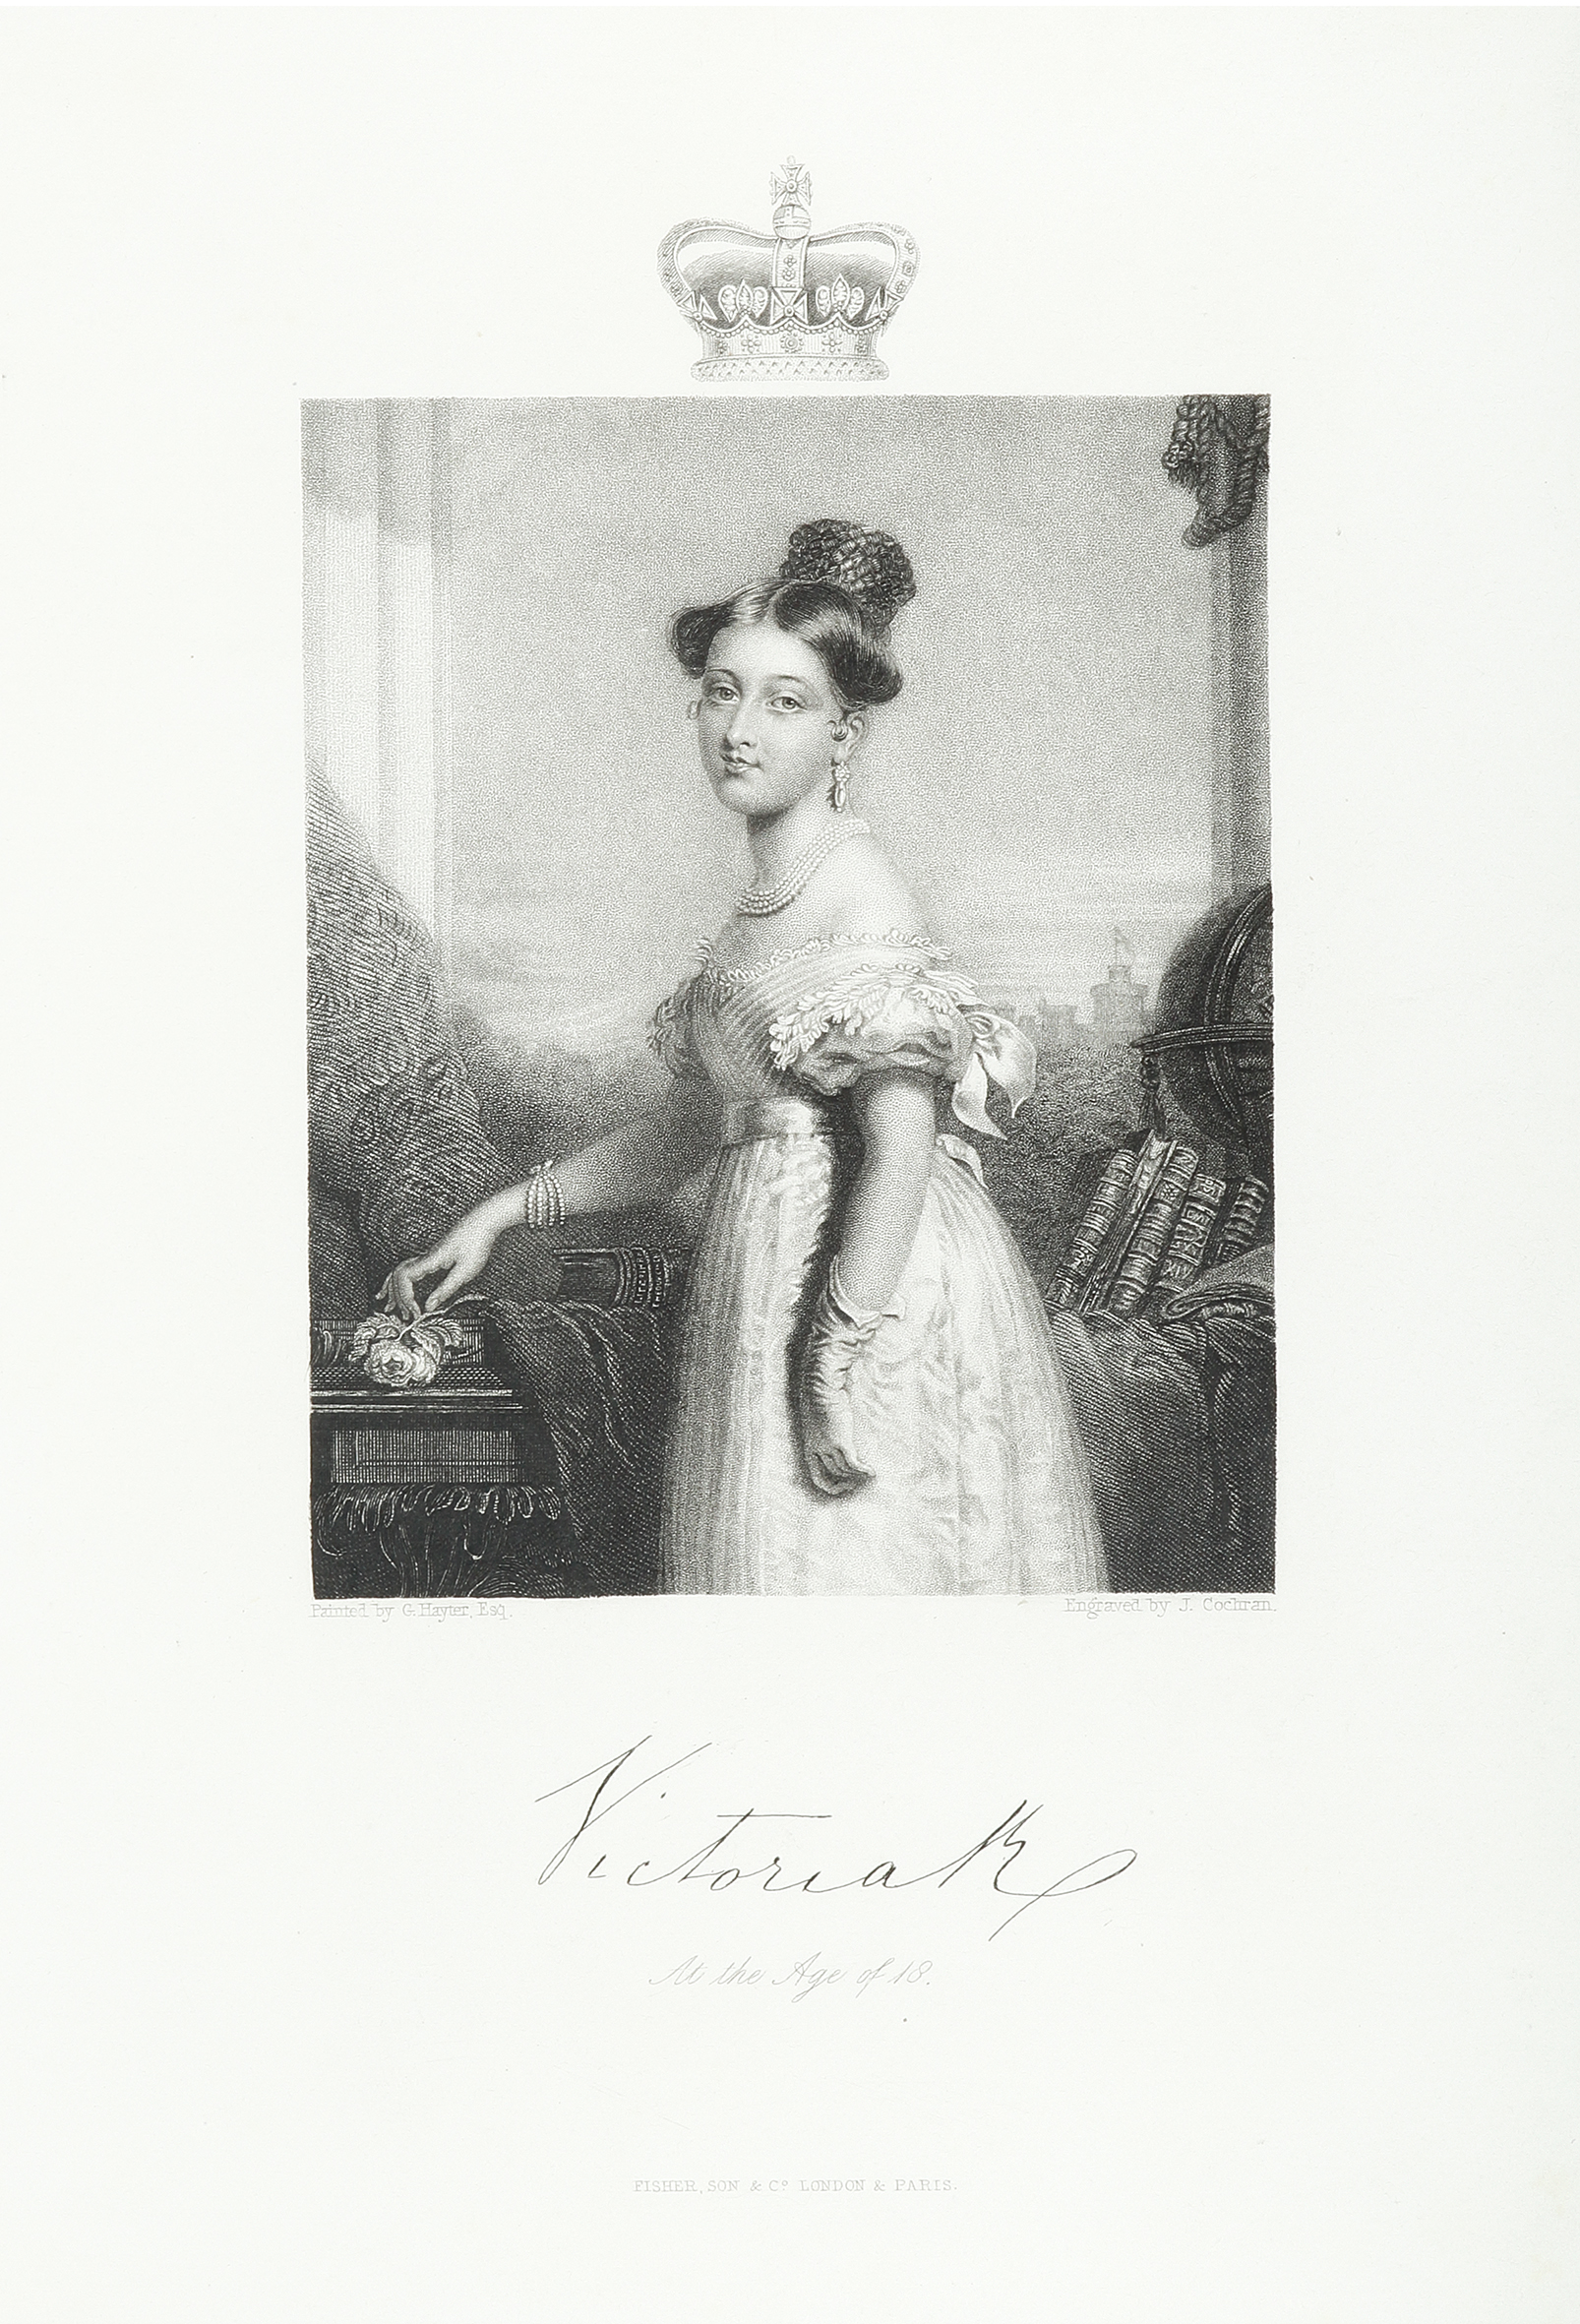 Victoria At the Age of 18. - Antique Print from 1846